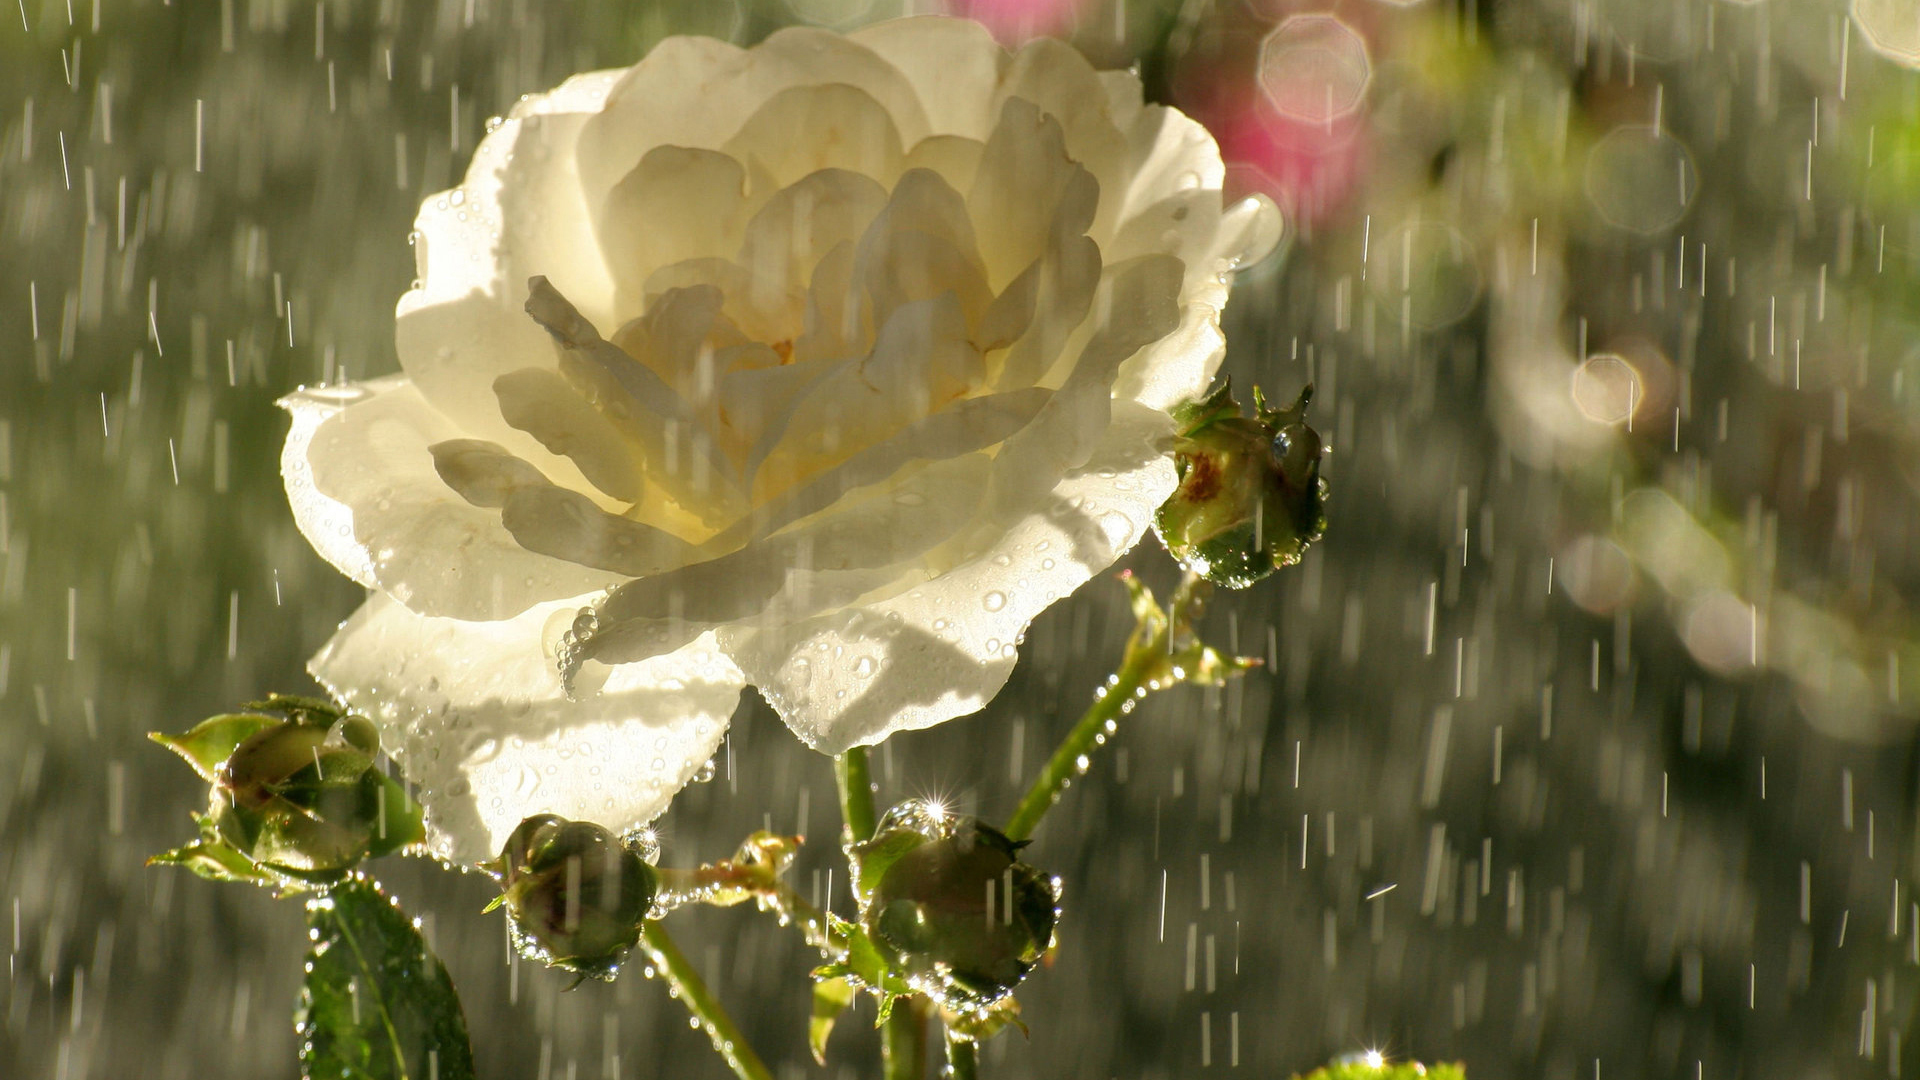 Garden White Rose In The Rain Wallpapers And Images   Wallpapers